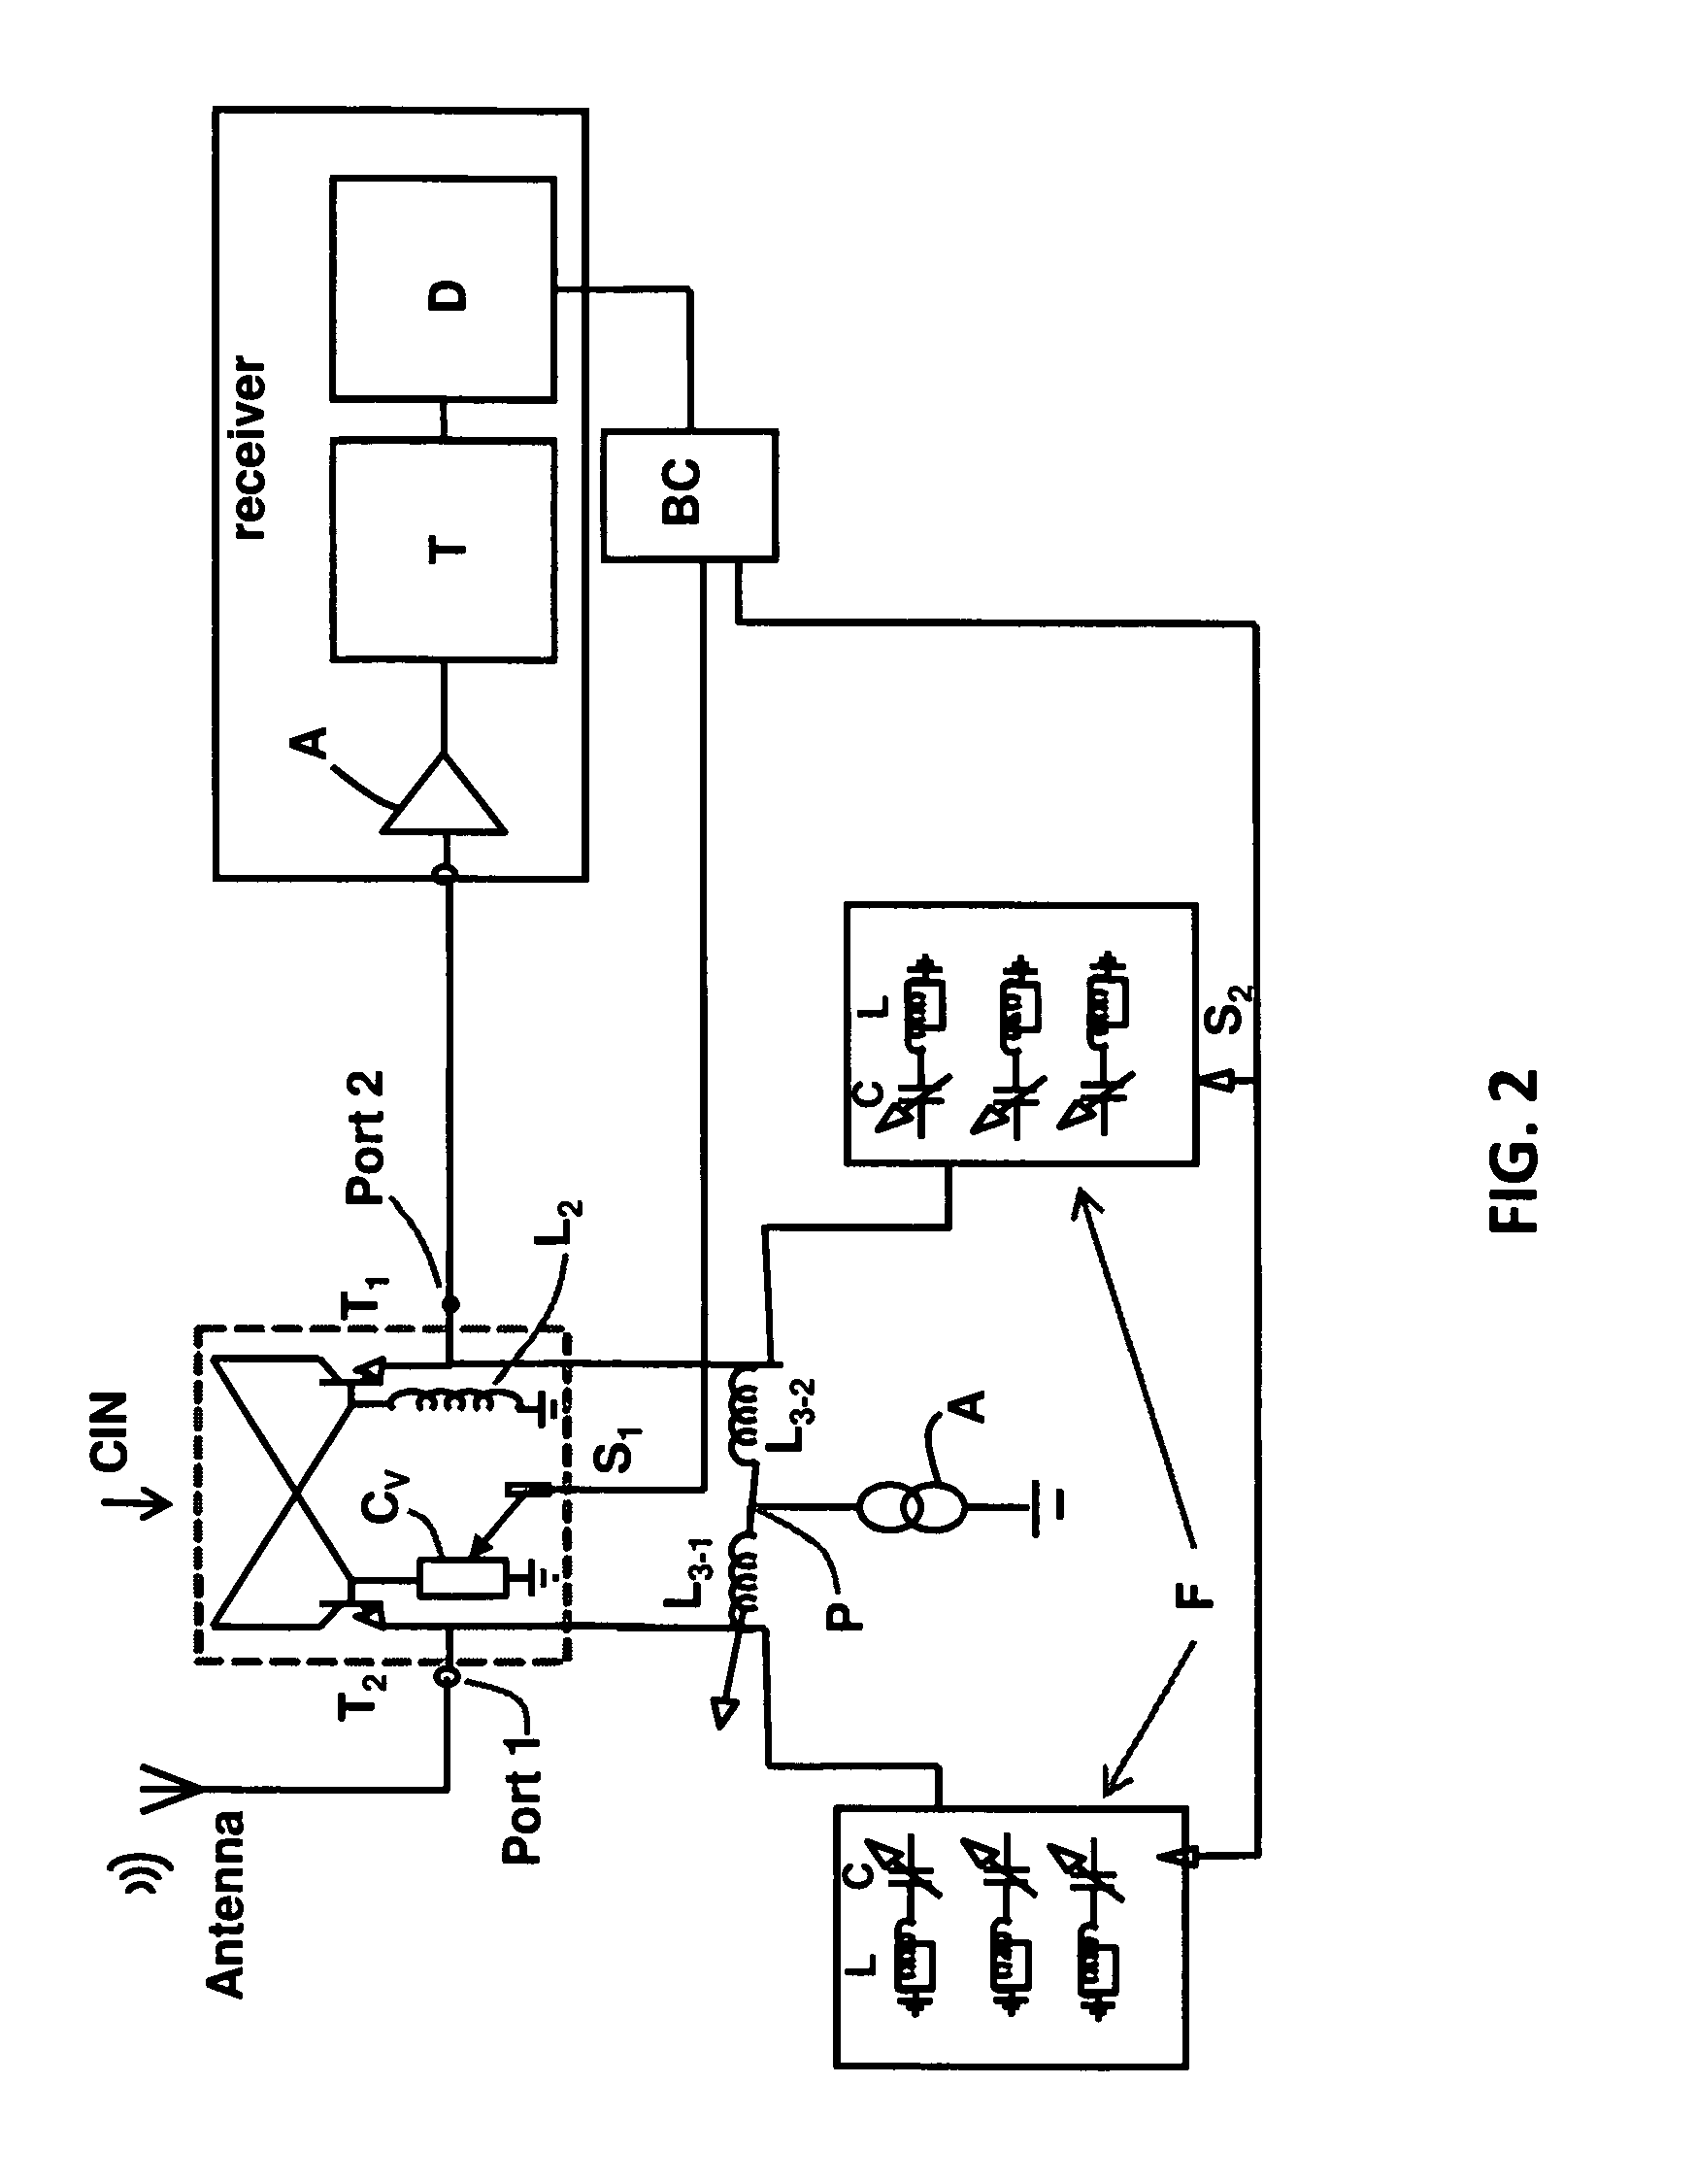 Antenna system comprising an electrically small antenna for reception of UHF band channel signals